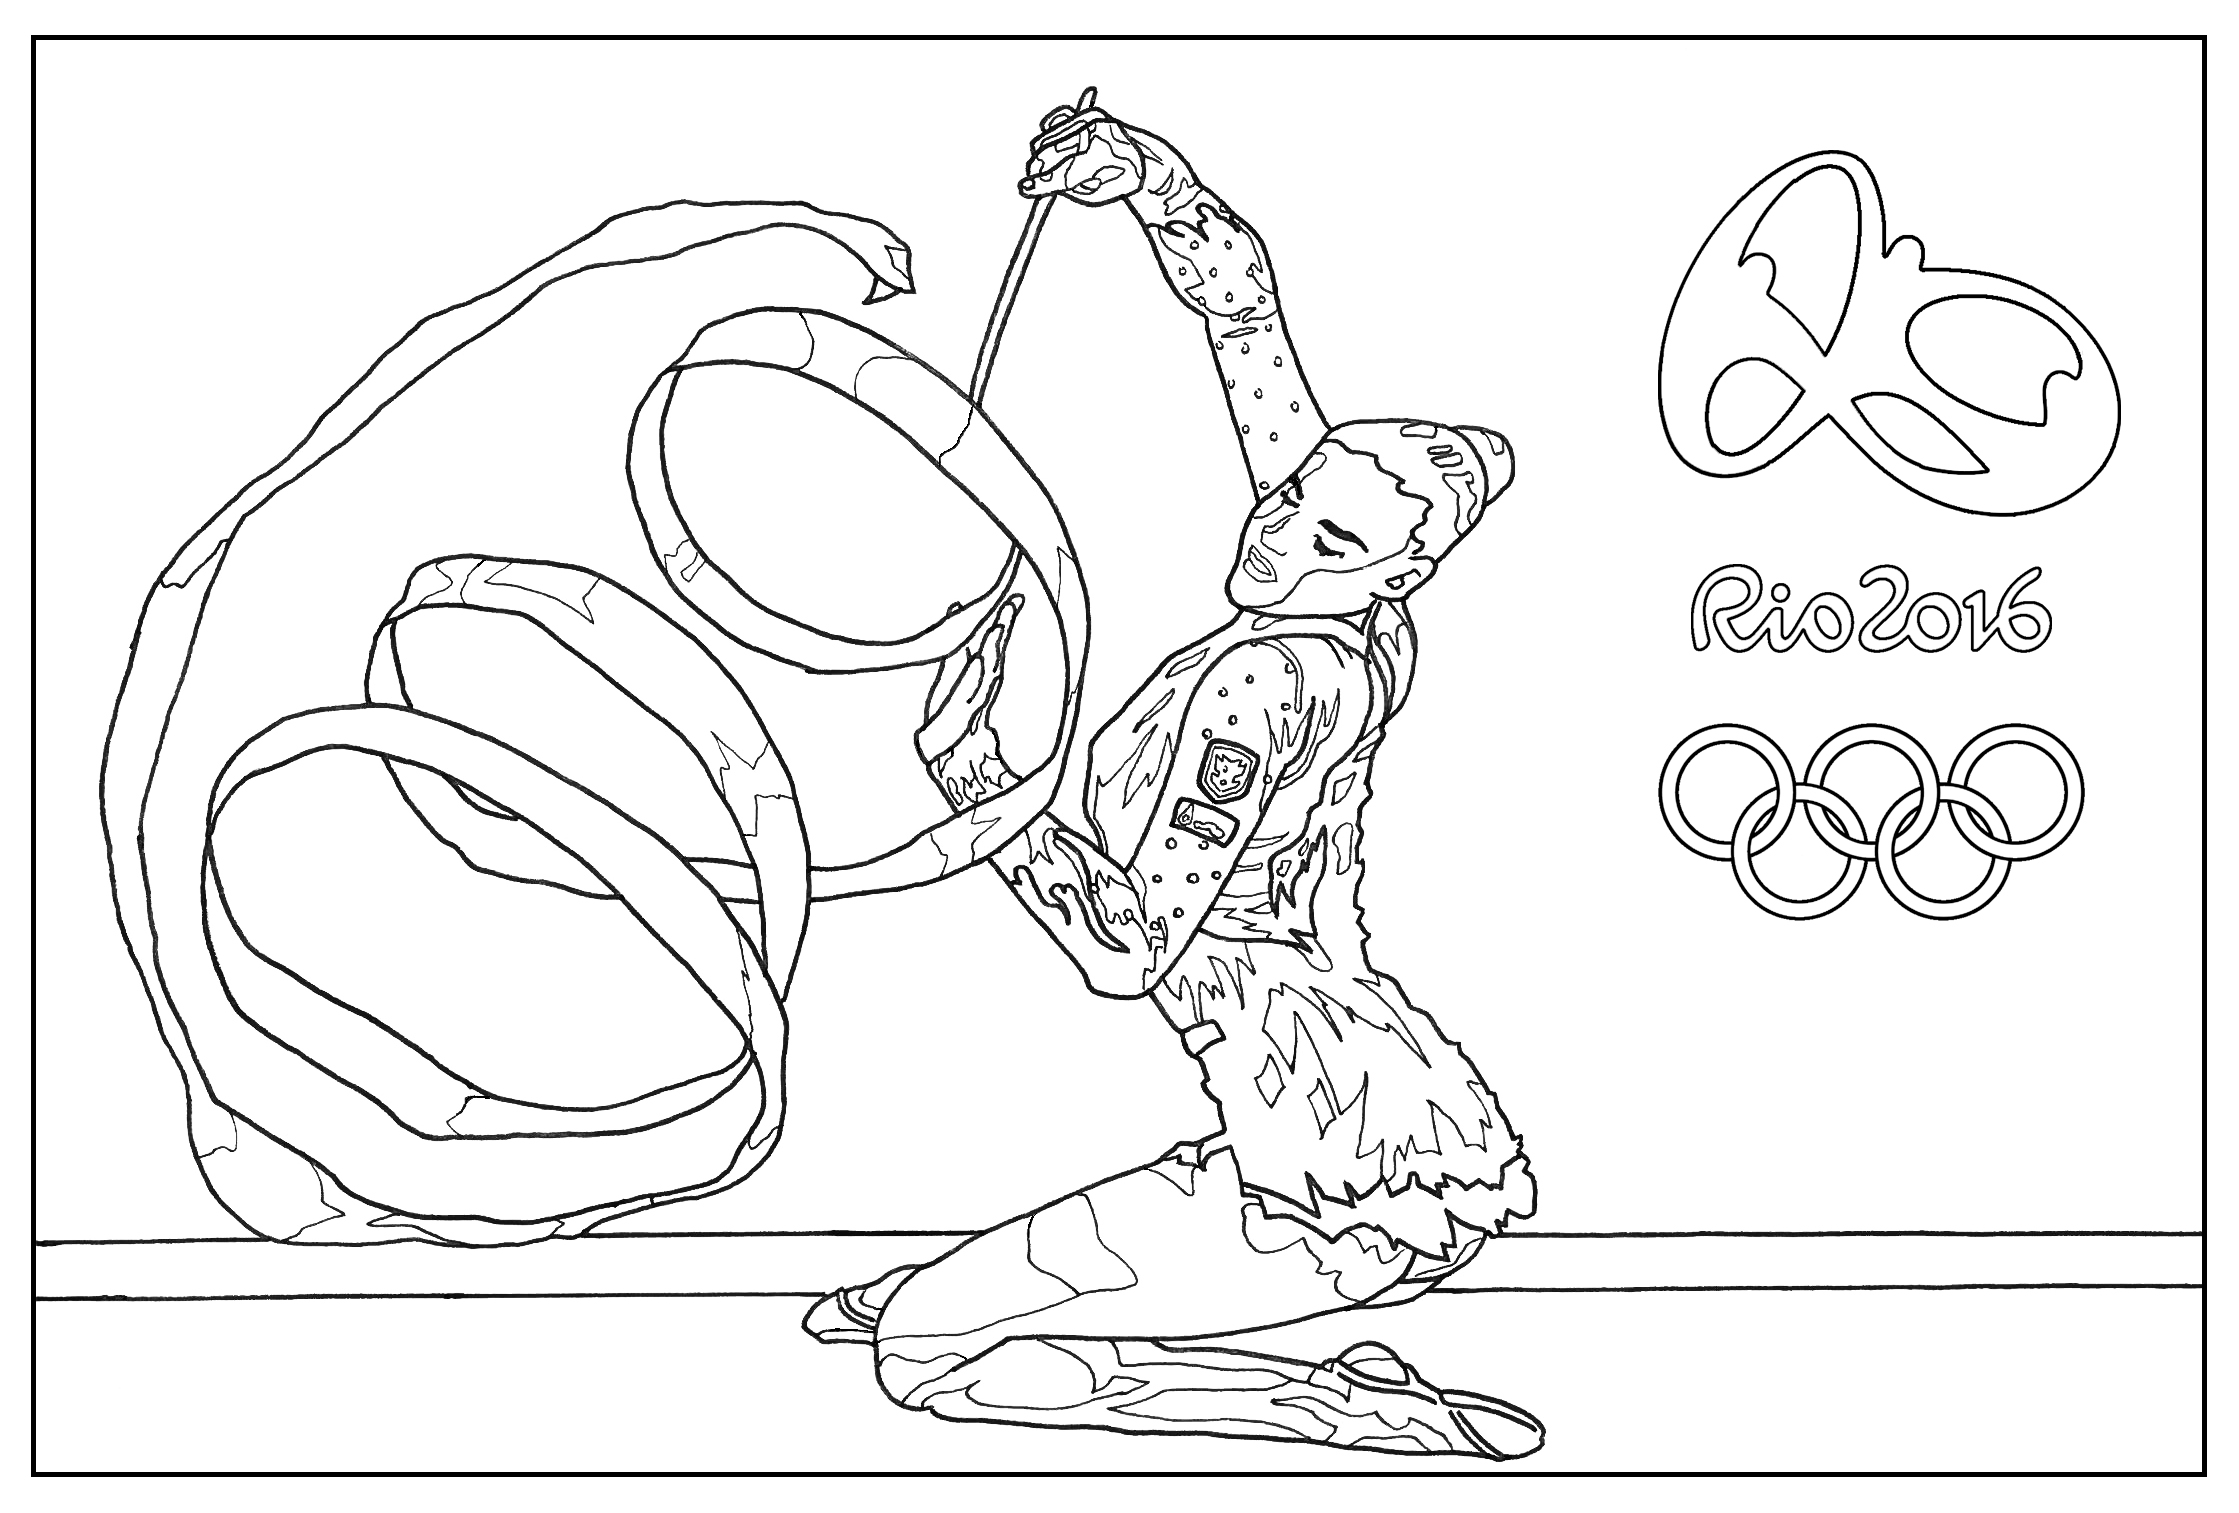 Coloring page for the 2016 Rio Olympic games : Gymnastic, Artist : Sofian